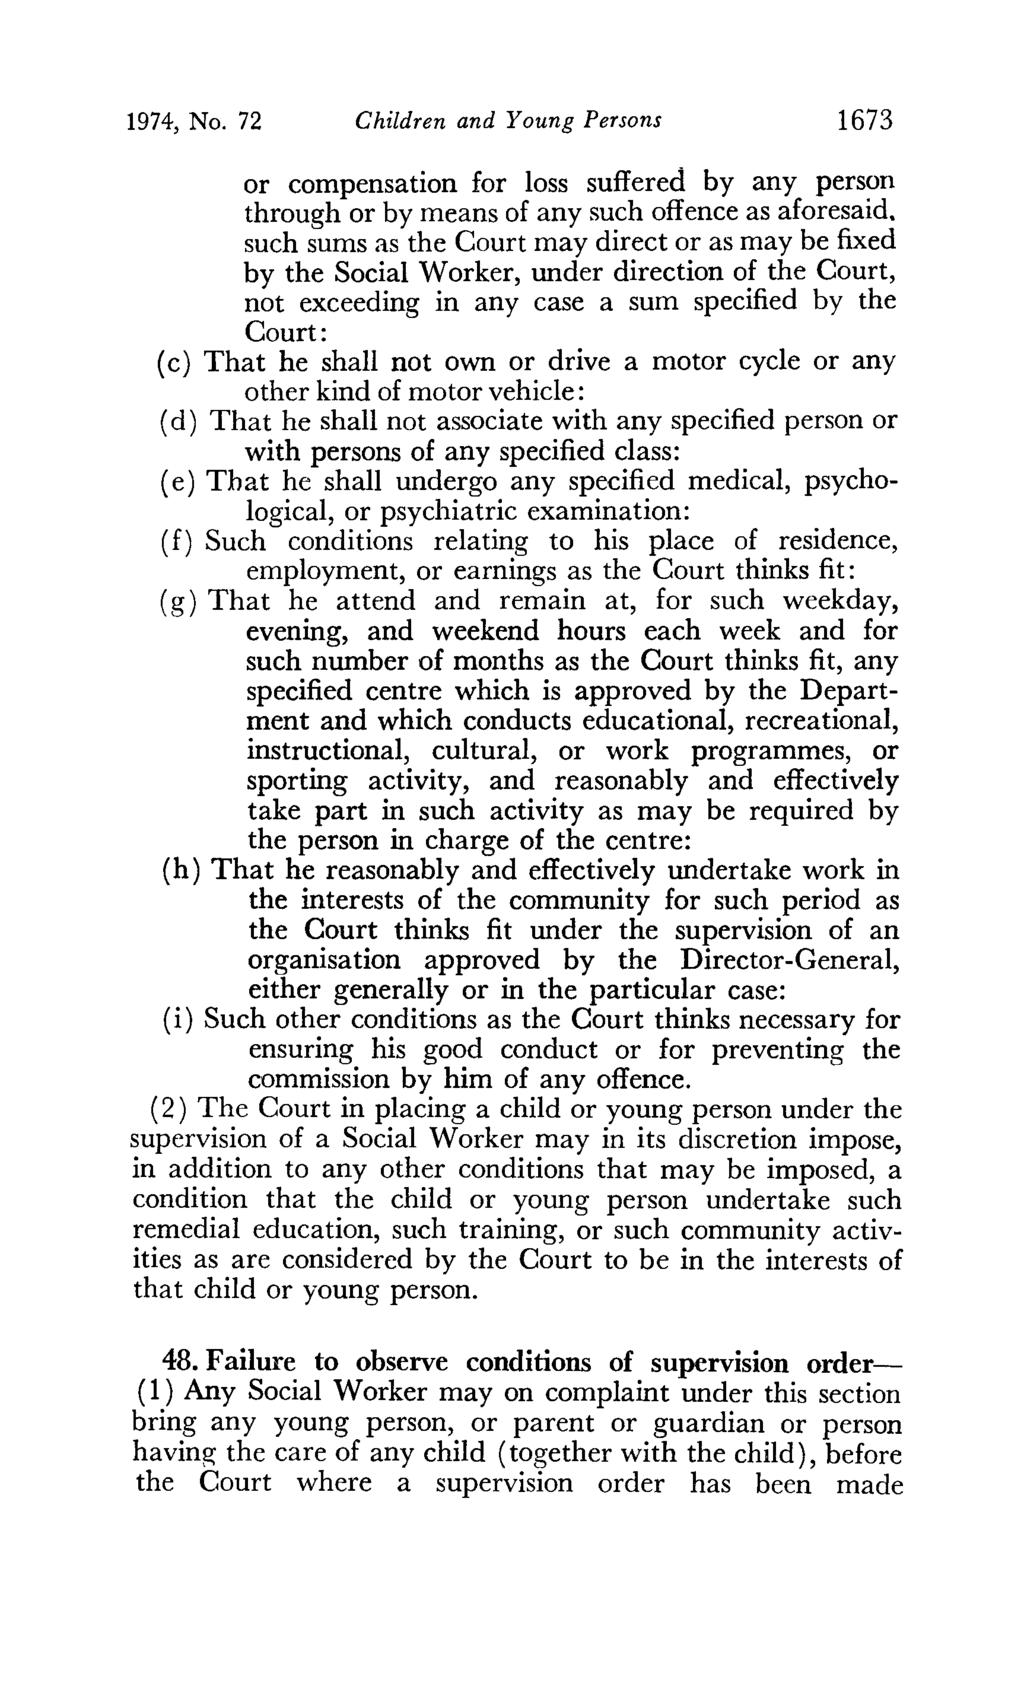 1974, No. 72 Children and Young Persons 1673 or compensation for loss suffered by any person through or by means of any such offence as aforesaid.